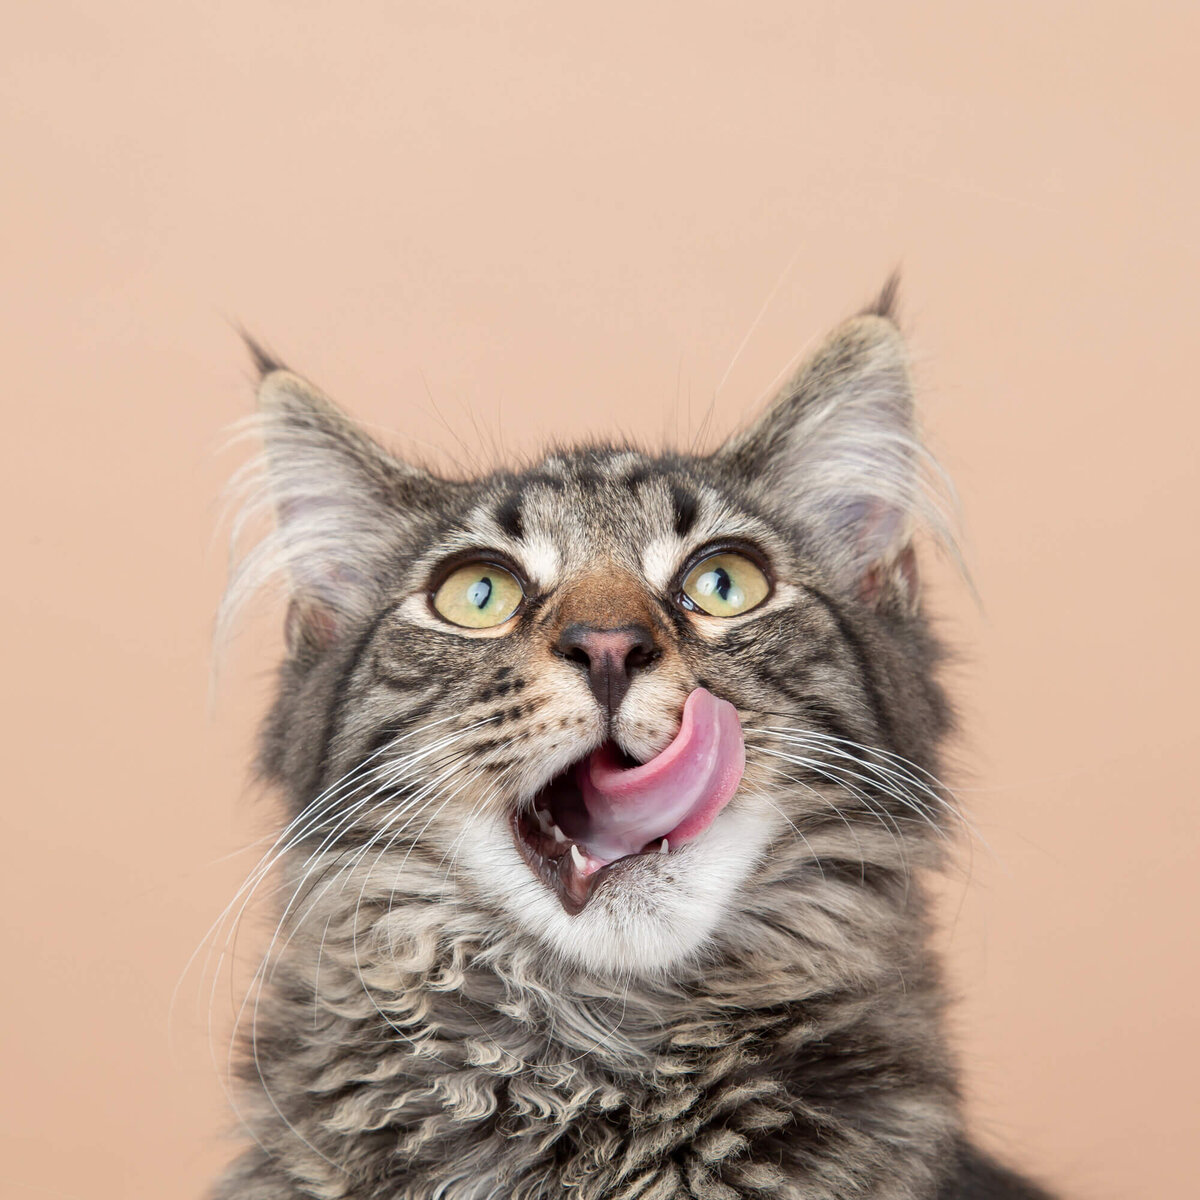 Maine coon kitten licking its lips on tan backdrop